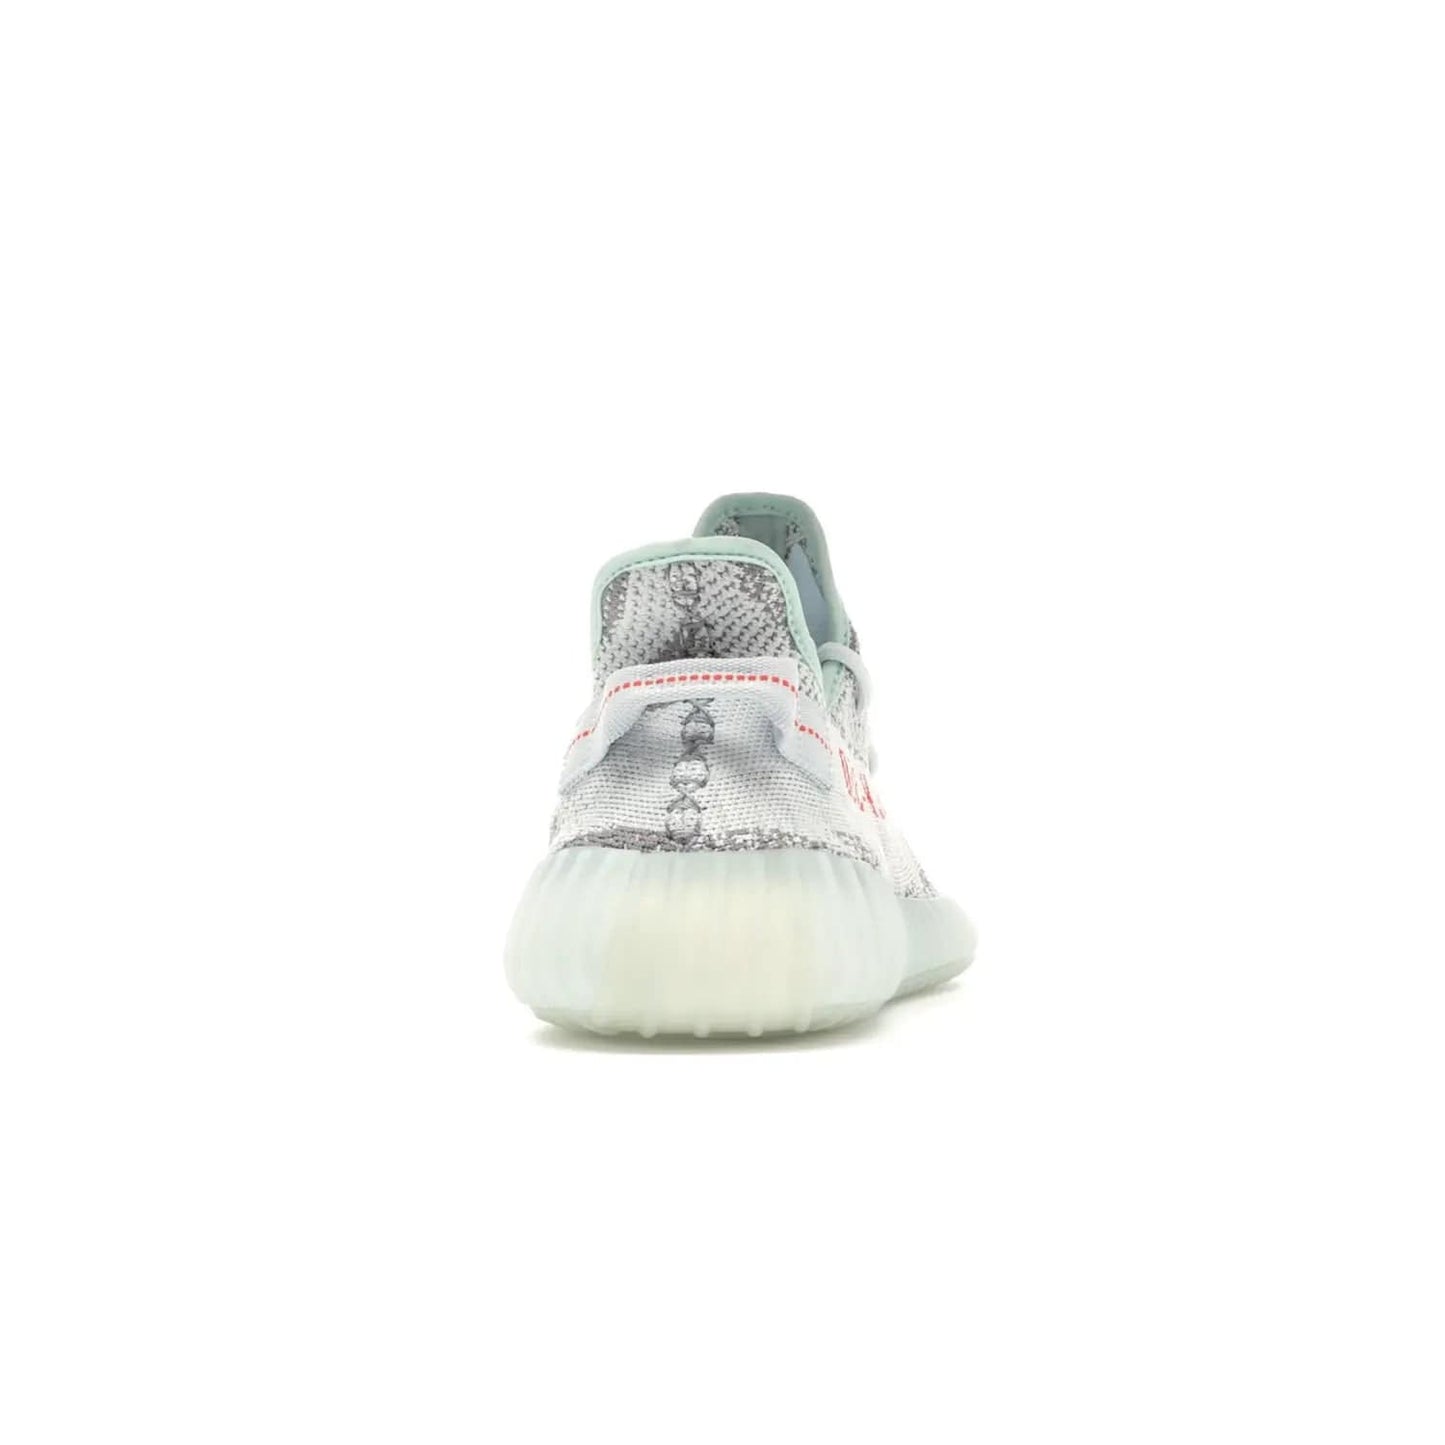 adidas Yeezy Boost 350 V2 Blue Tint - Image 29 - Only at www.BallersClubKickz.com - The adidas Yeezy Boost 350 V2 Blue Tint merges fashion and functionality with its Primeknit upper and Boost sole. Released in December 2017, this luxurious sneaker is perfect for making a stylish statement.